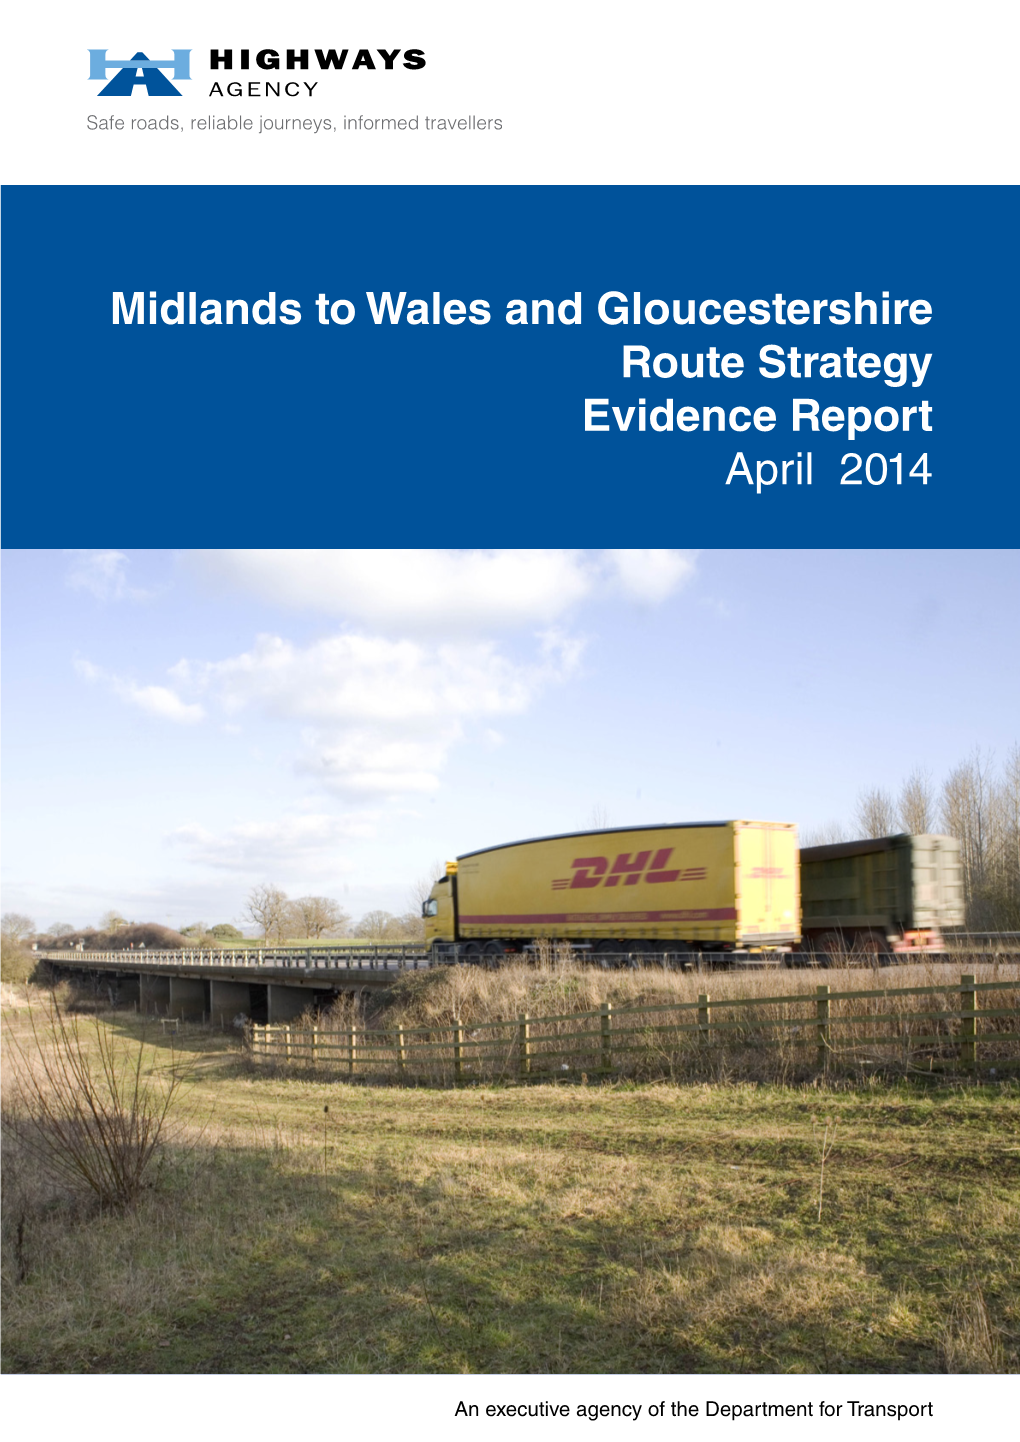 Midlands to Wales and Gloucestershire Route Strategy Evidence Report April 2014